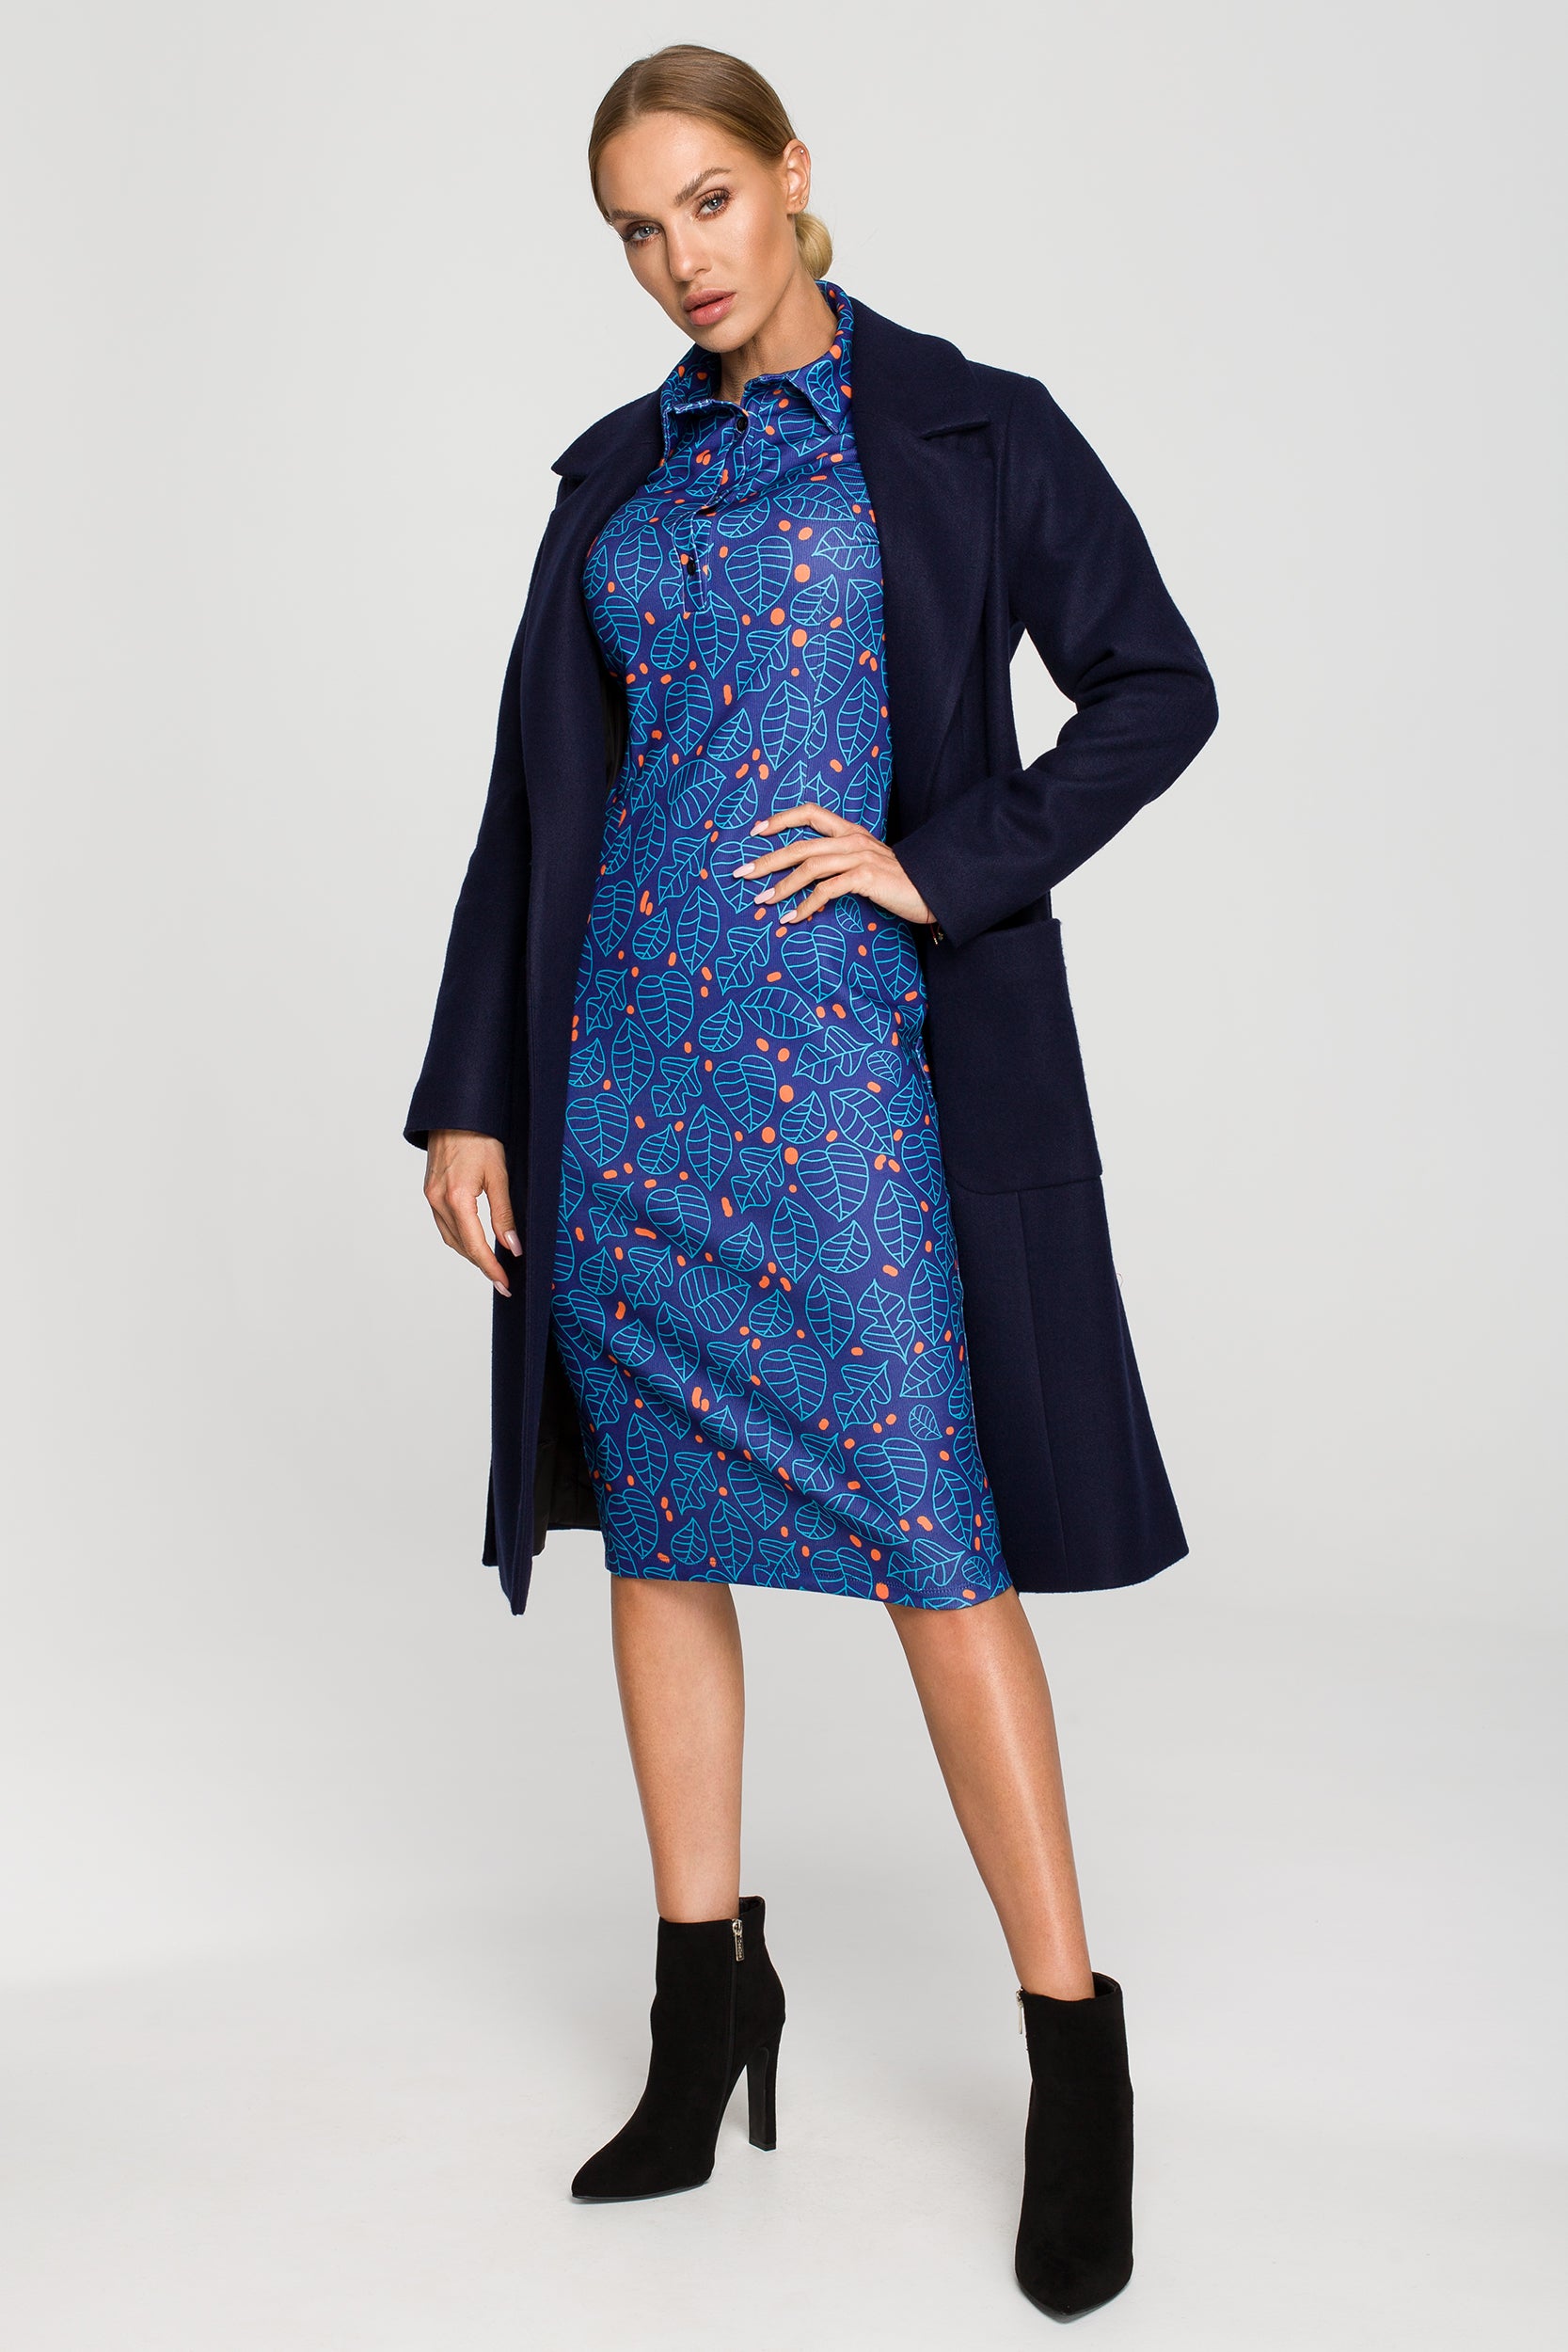 Fleece Coat with Belt and Pockets | Strictly In | Navy Blue Belted Coat